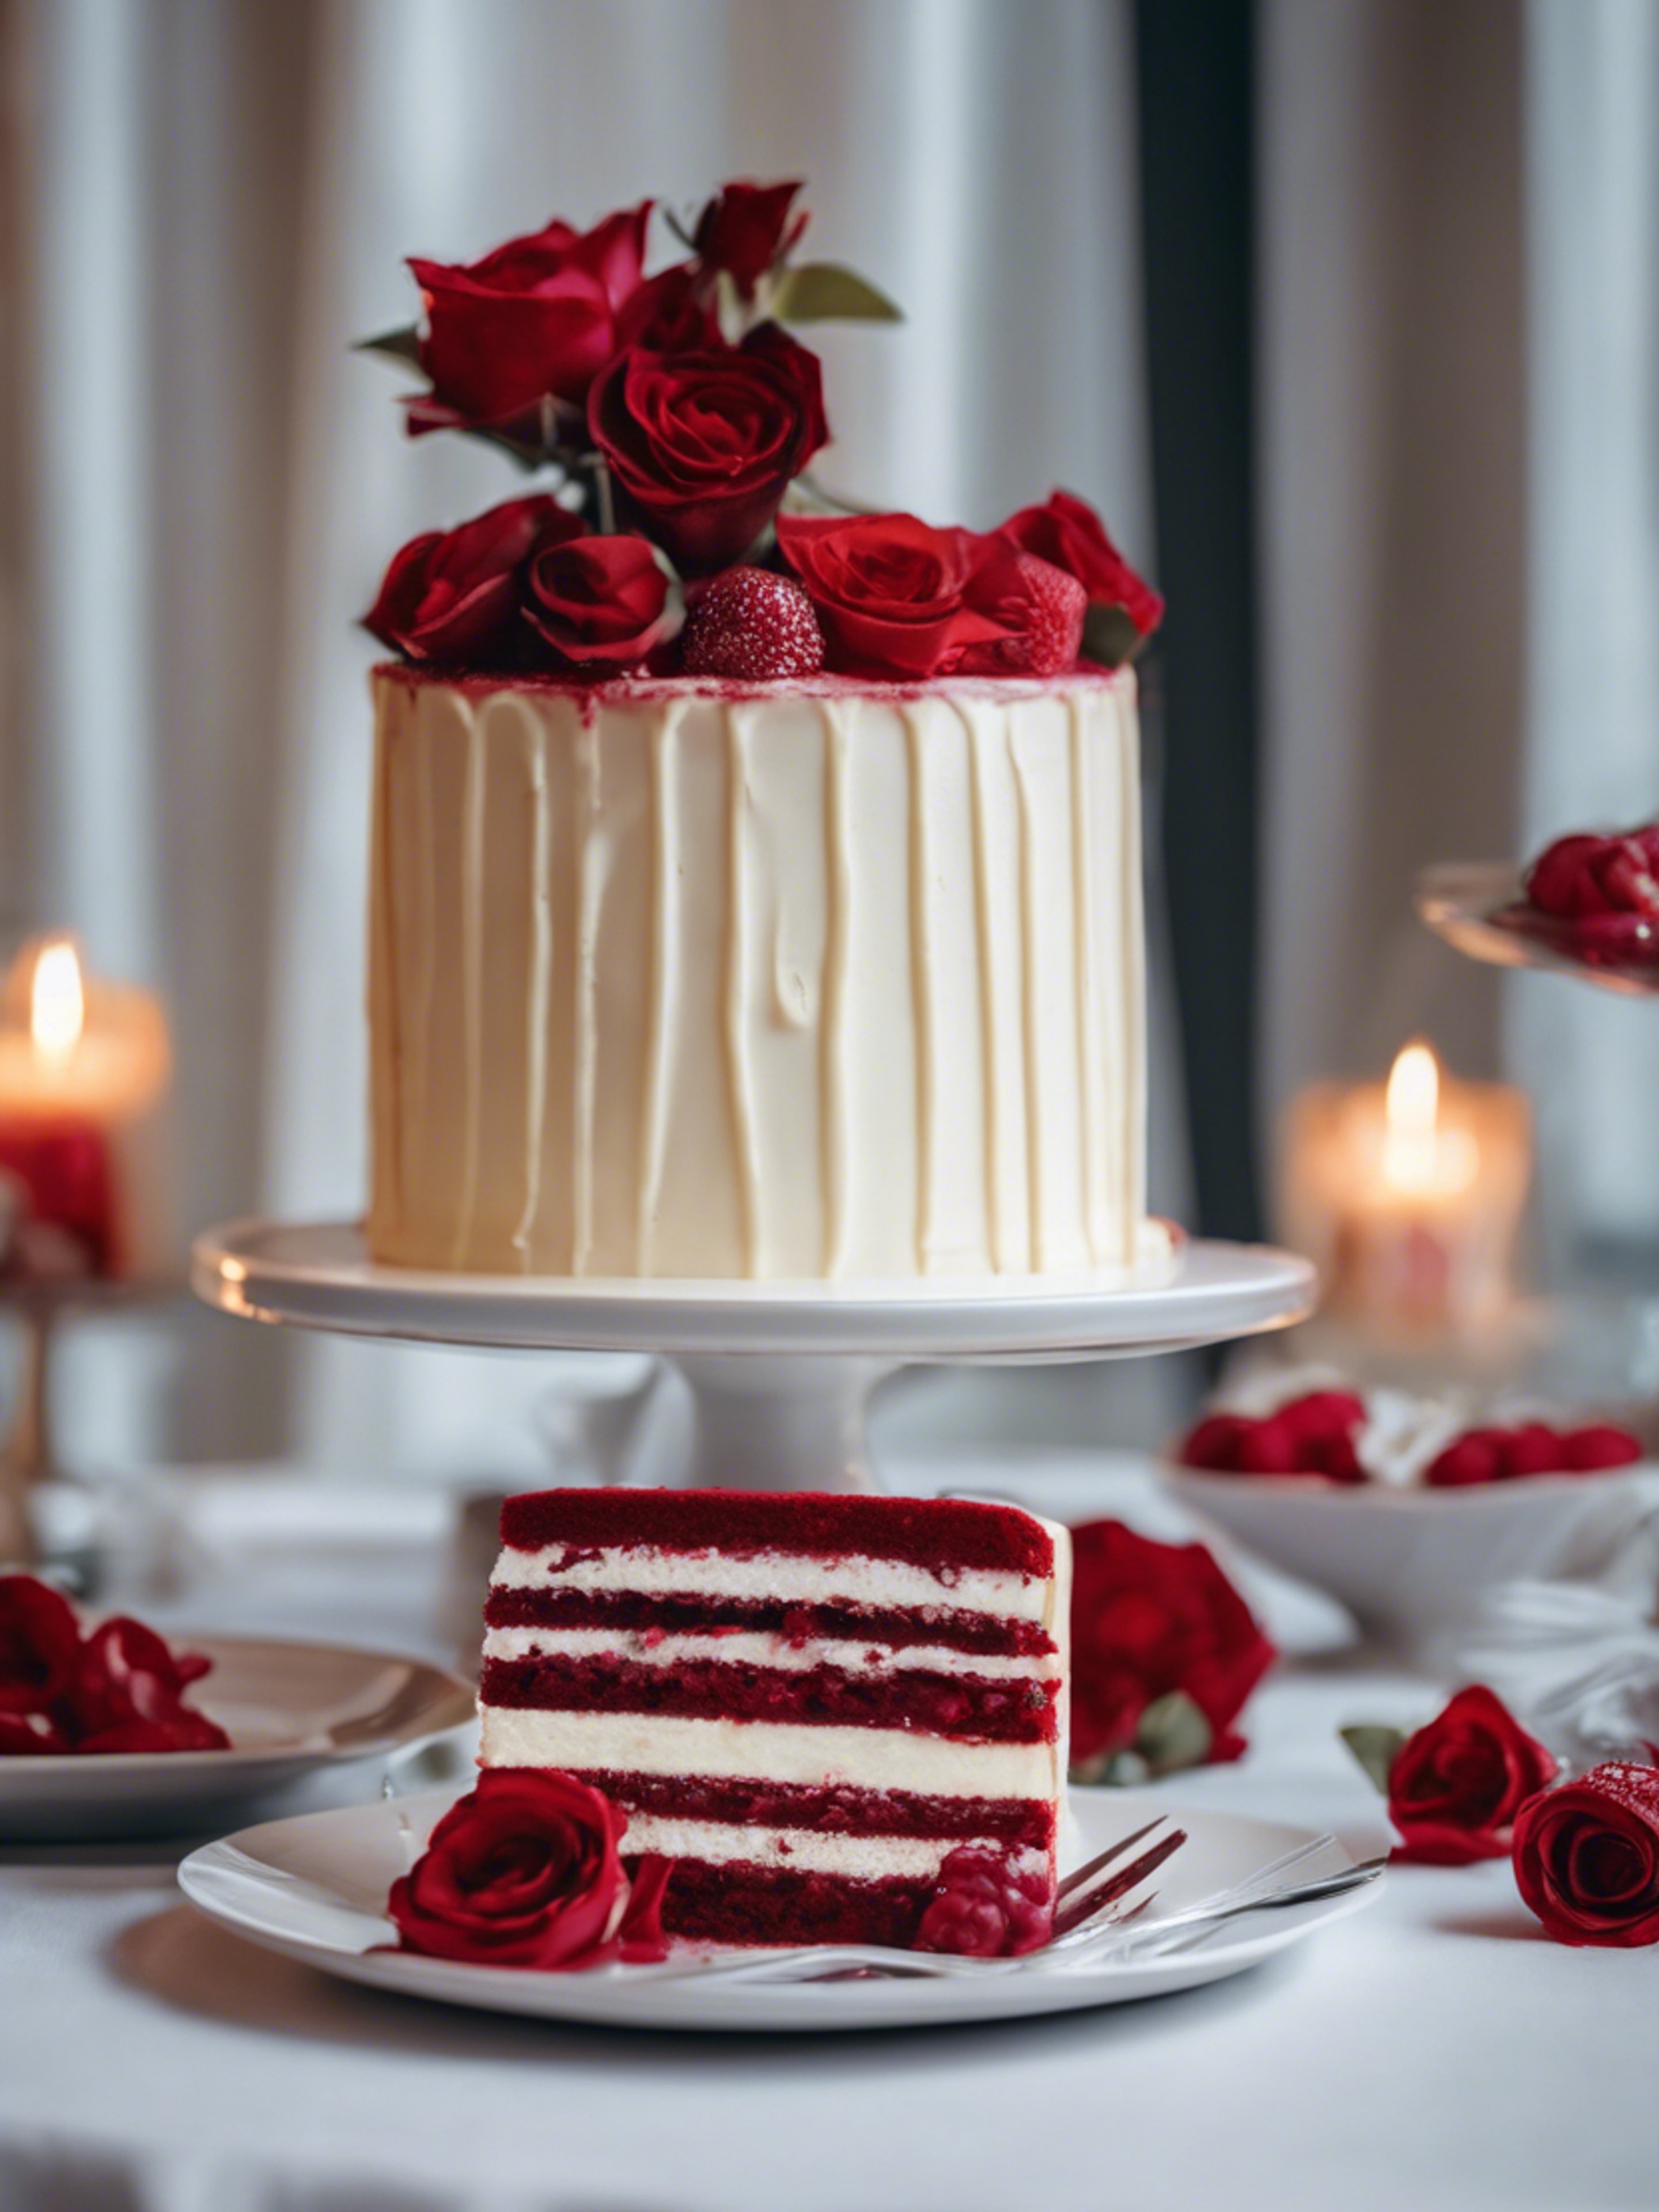 A scrumptious red velvet and white cream layered cake on a dessert table. Wallpaper[9c378ca78b014f2daafb]